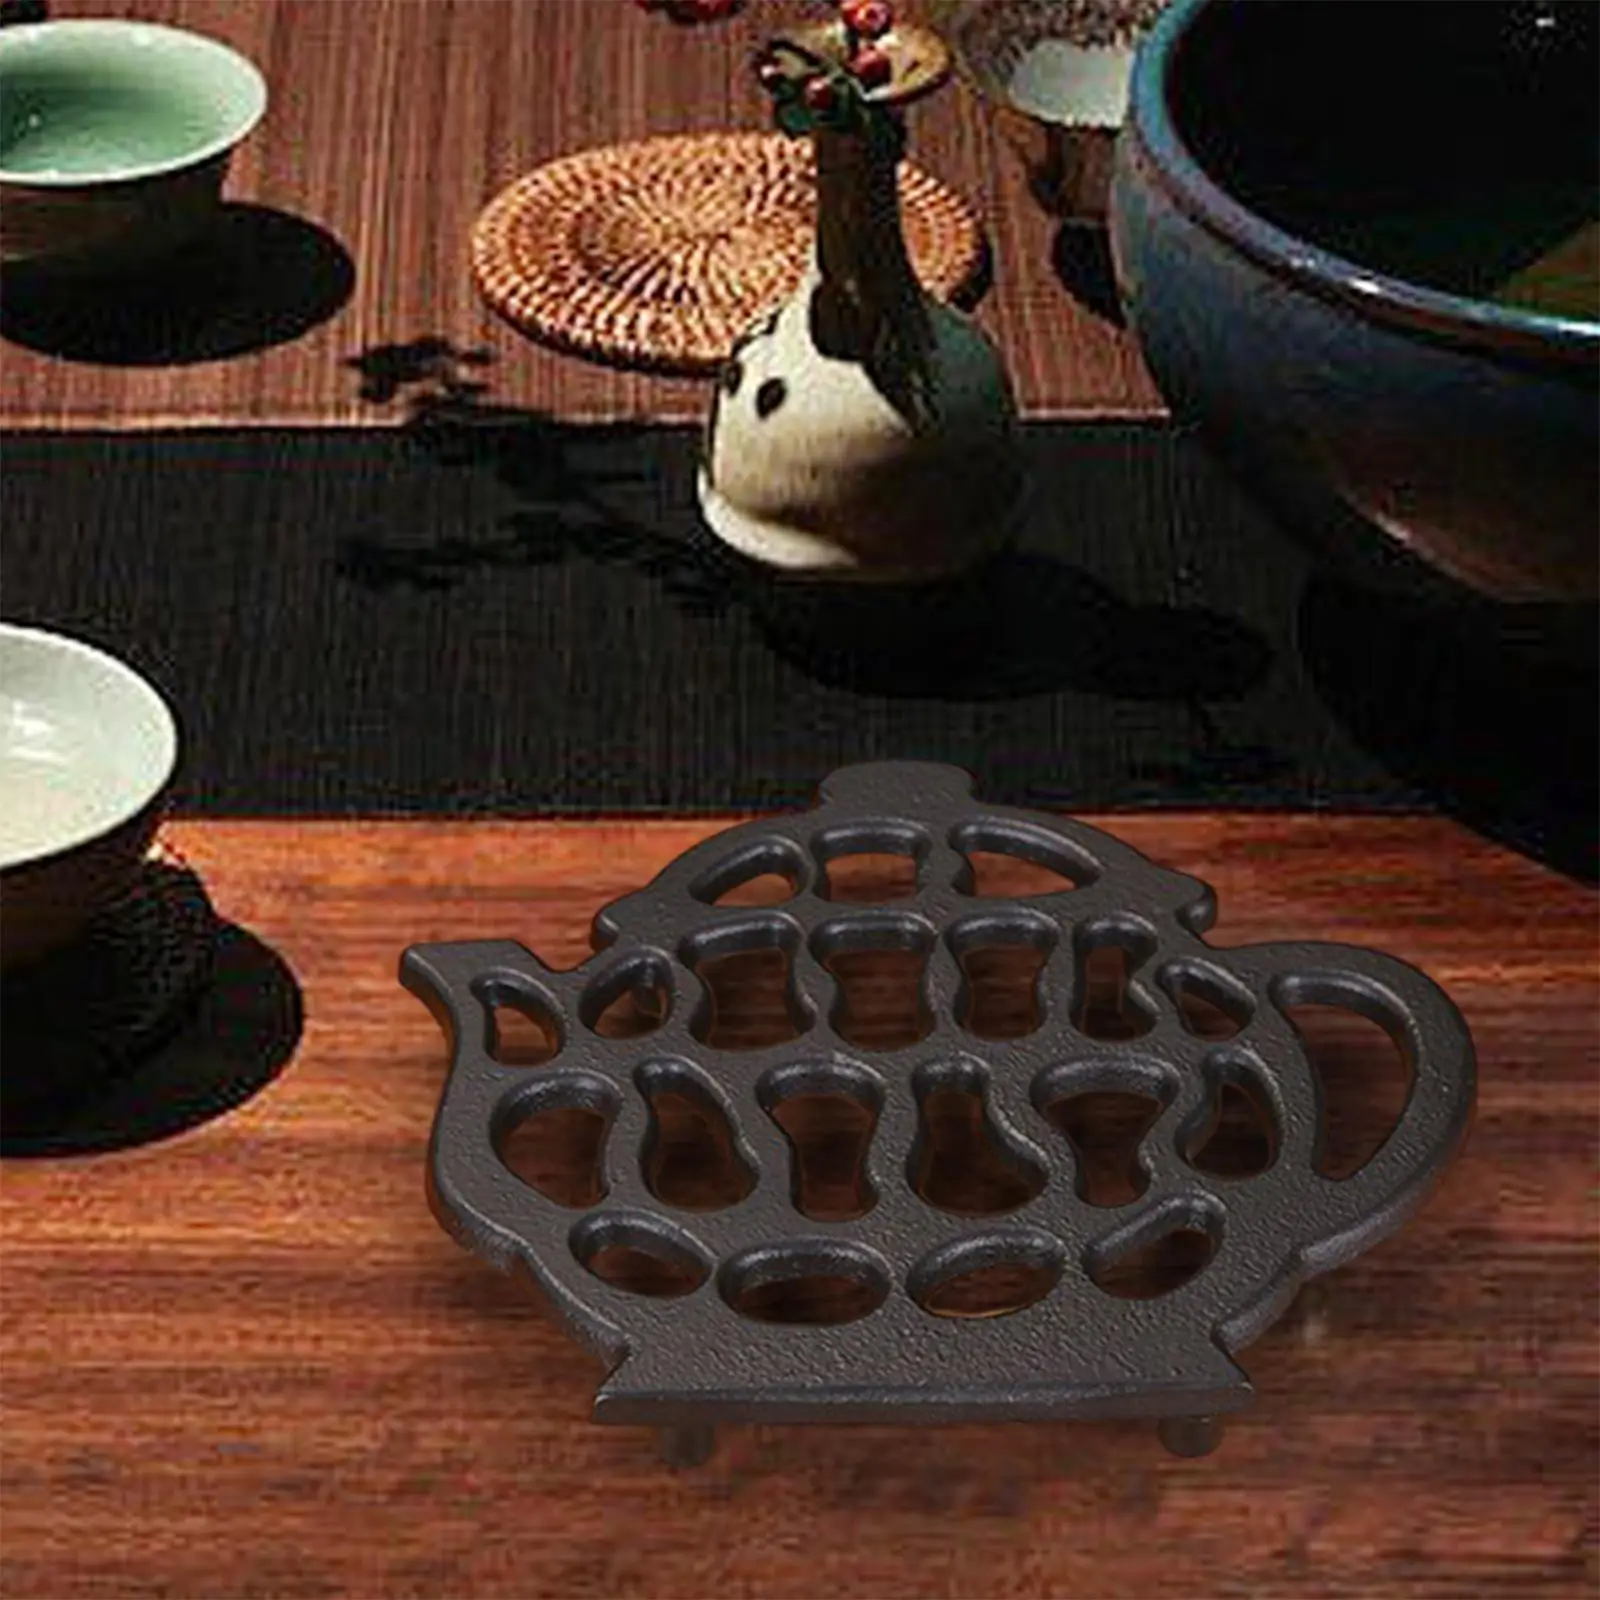 Teapot Cast Iron Trivets Heat Resistant Vintage Exquisite Insulated Pad Thermal Holder Teaware for Kitchen Pots Pans Dishes Cup